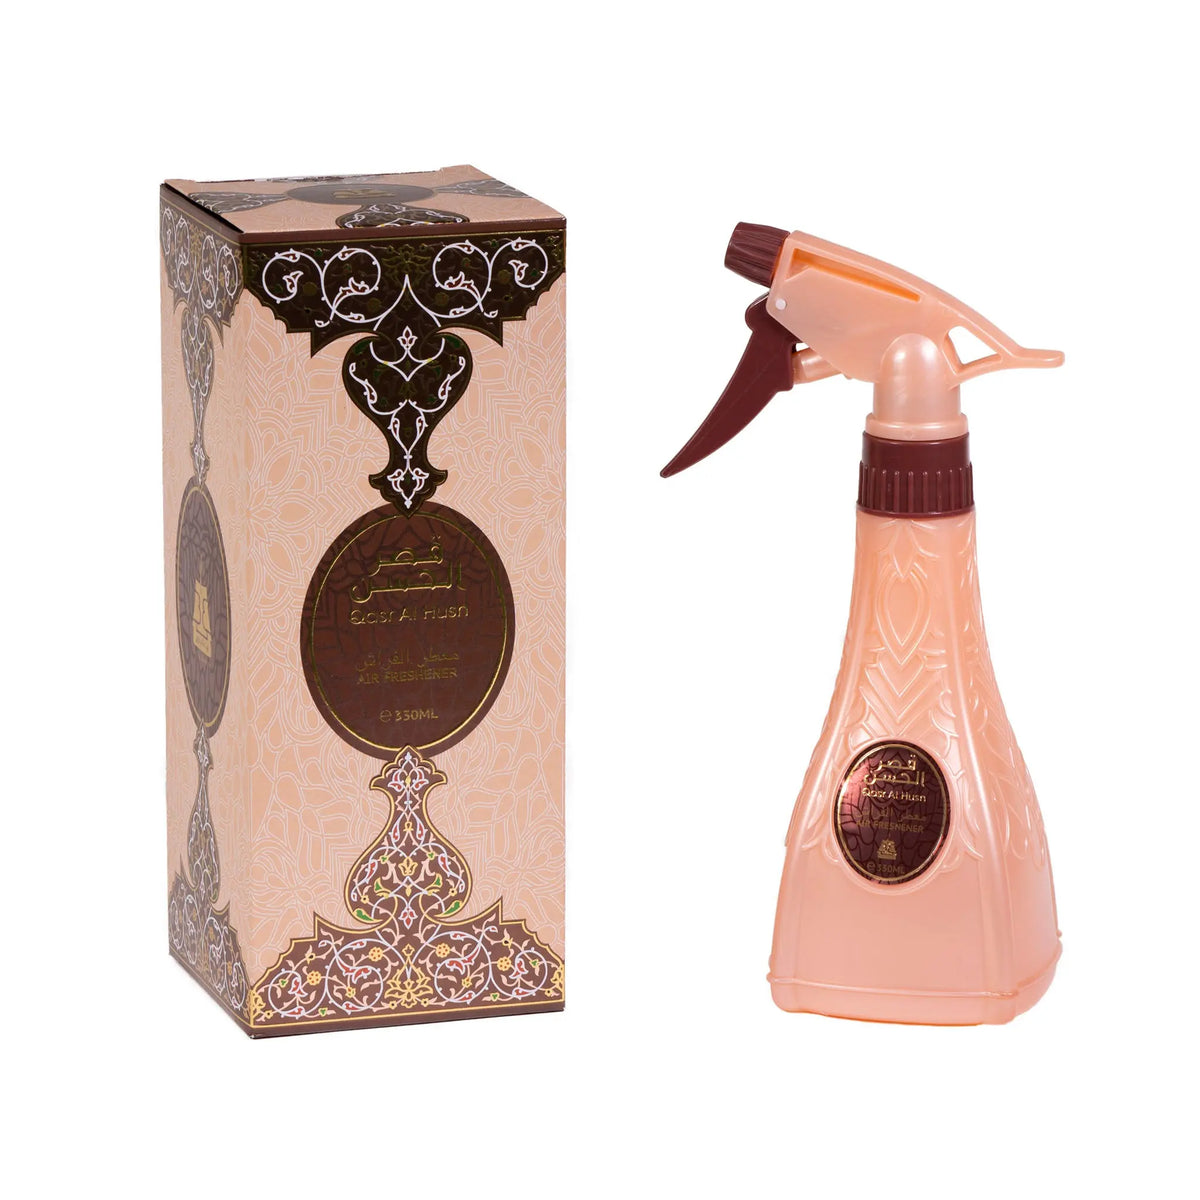 The image shows two items: on the left, a rectangular box with intricate patterns in shades of beige, brown, and gold, featuring Arabic calligraphy and English text that reads "Qasr Al Husn Air Freshener," with a capacity of "350ML." On the right, there's a spray bottle with a peach-colored body and a dark brown spray head. The bottle has a similar design as the box with a label that includes Arabic calligraphy and the same English text, "Qasr Al Husn." 